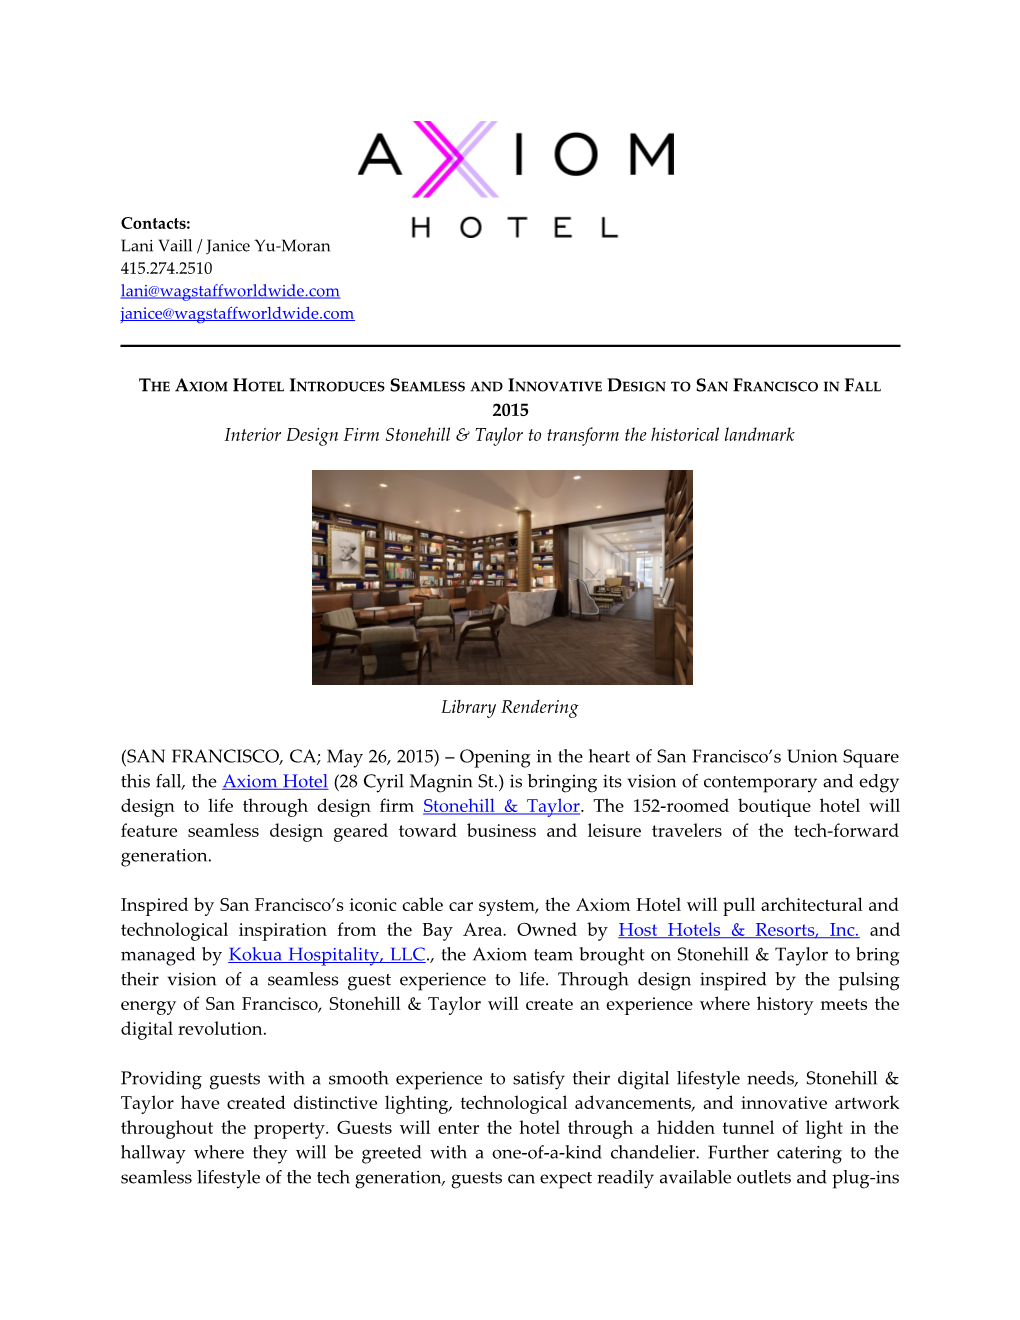 The Axiom Hotel Introduces Seamless and Innovative Design to San Francisco in Fall 2015